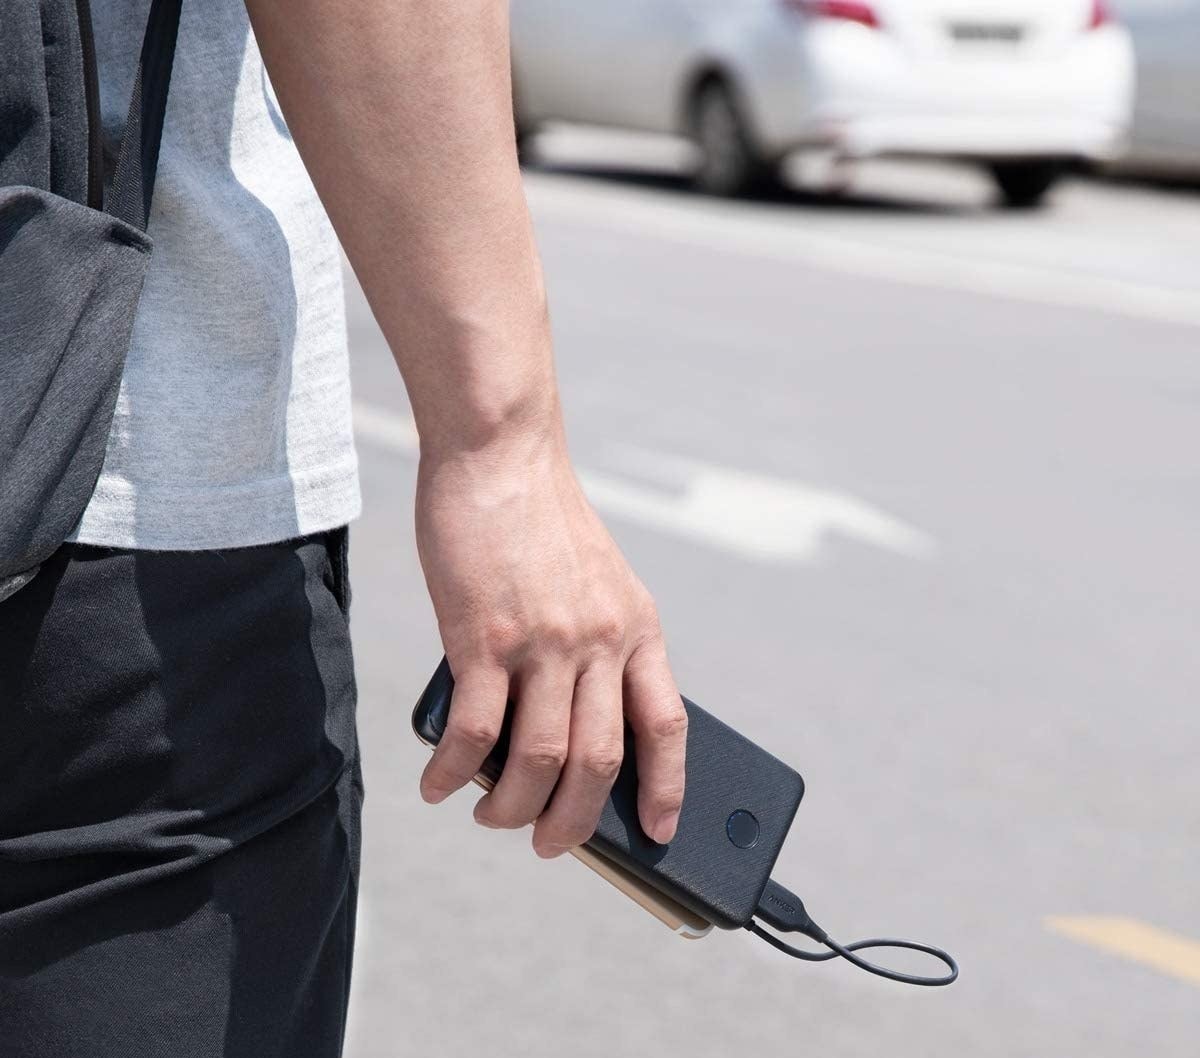 Model holding black charger battery pack in hand